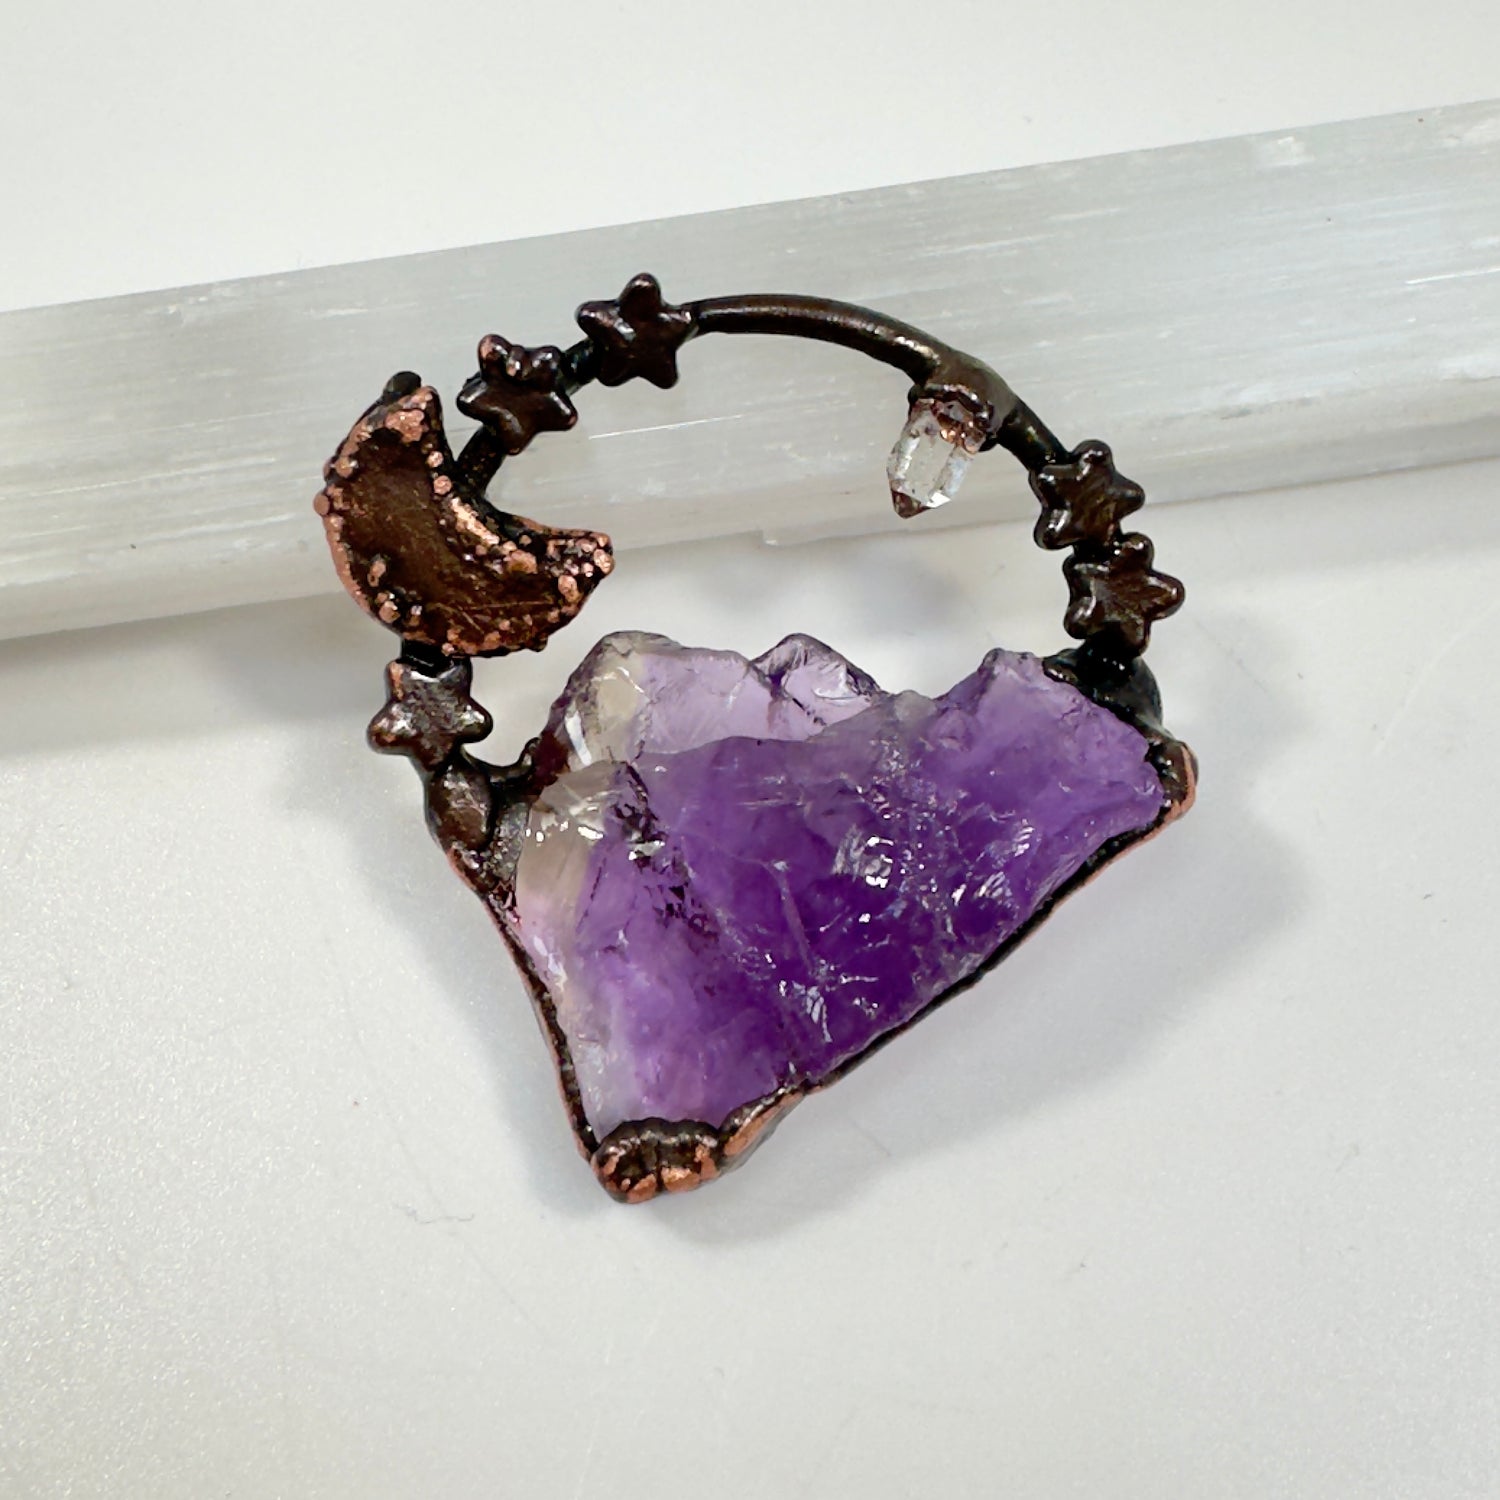 Copper, electroform, purple crystal necklace with Herkimer diamond